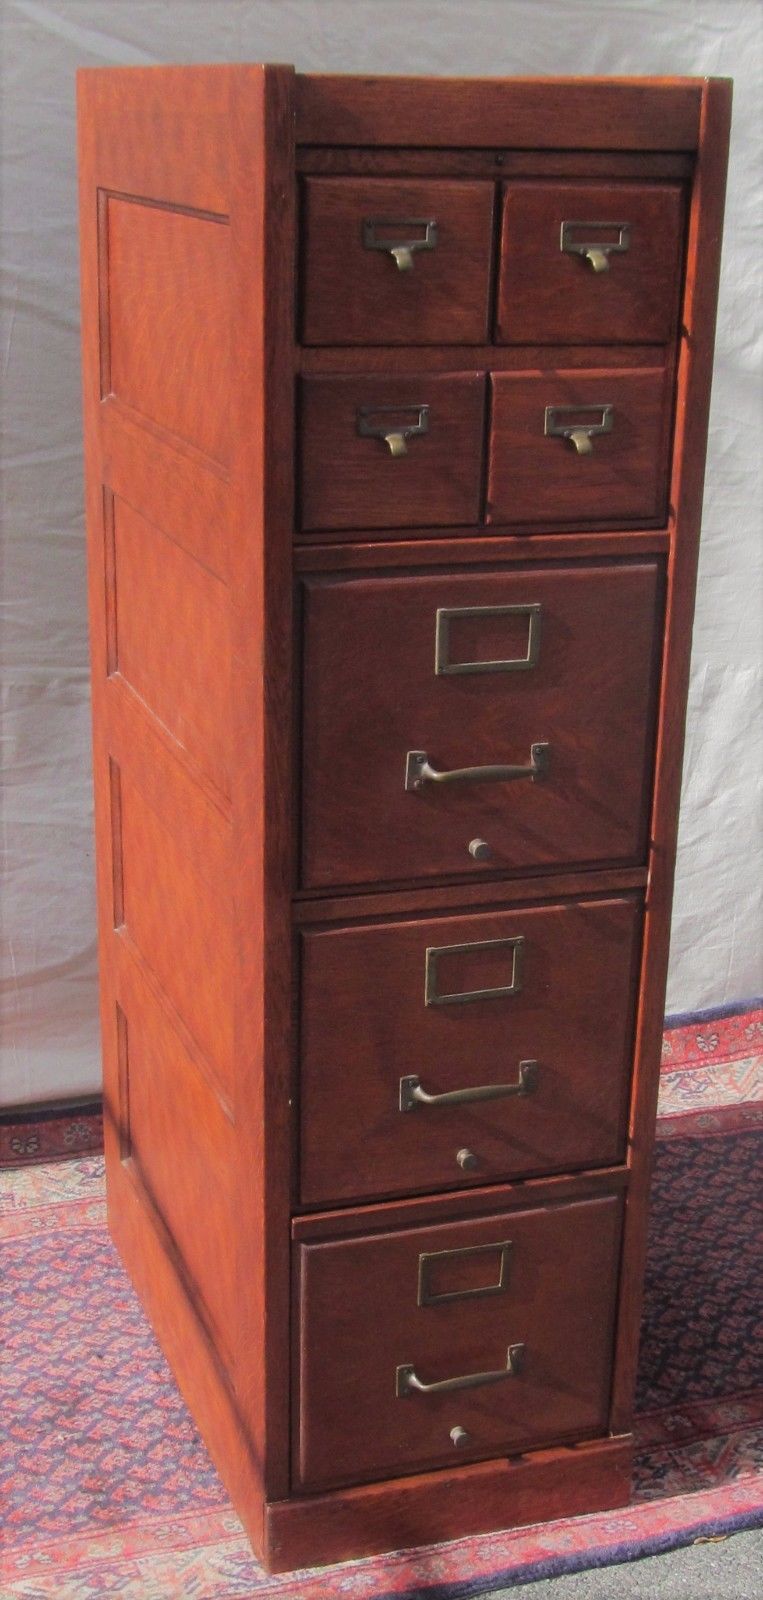 ANTIQUE ARTS & CRAFT OAK RAISED PANEL FILE CABINET WITH 4 OVER 3 DRAWER FORMAT